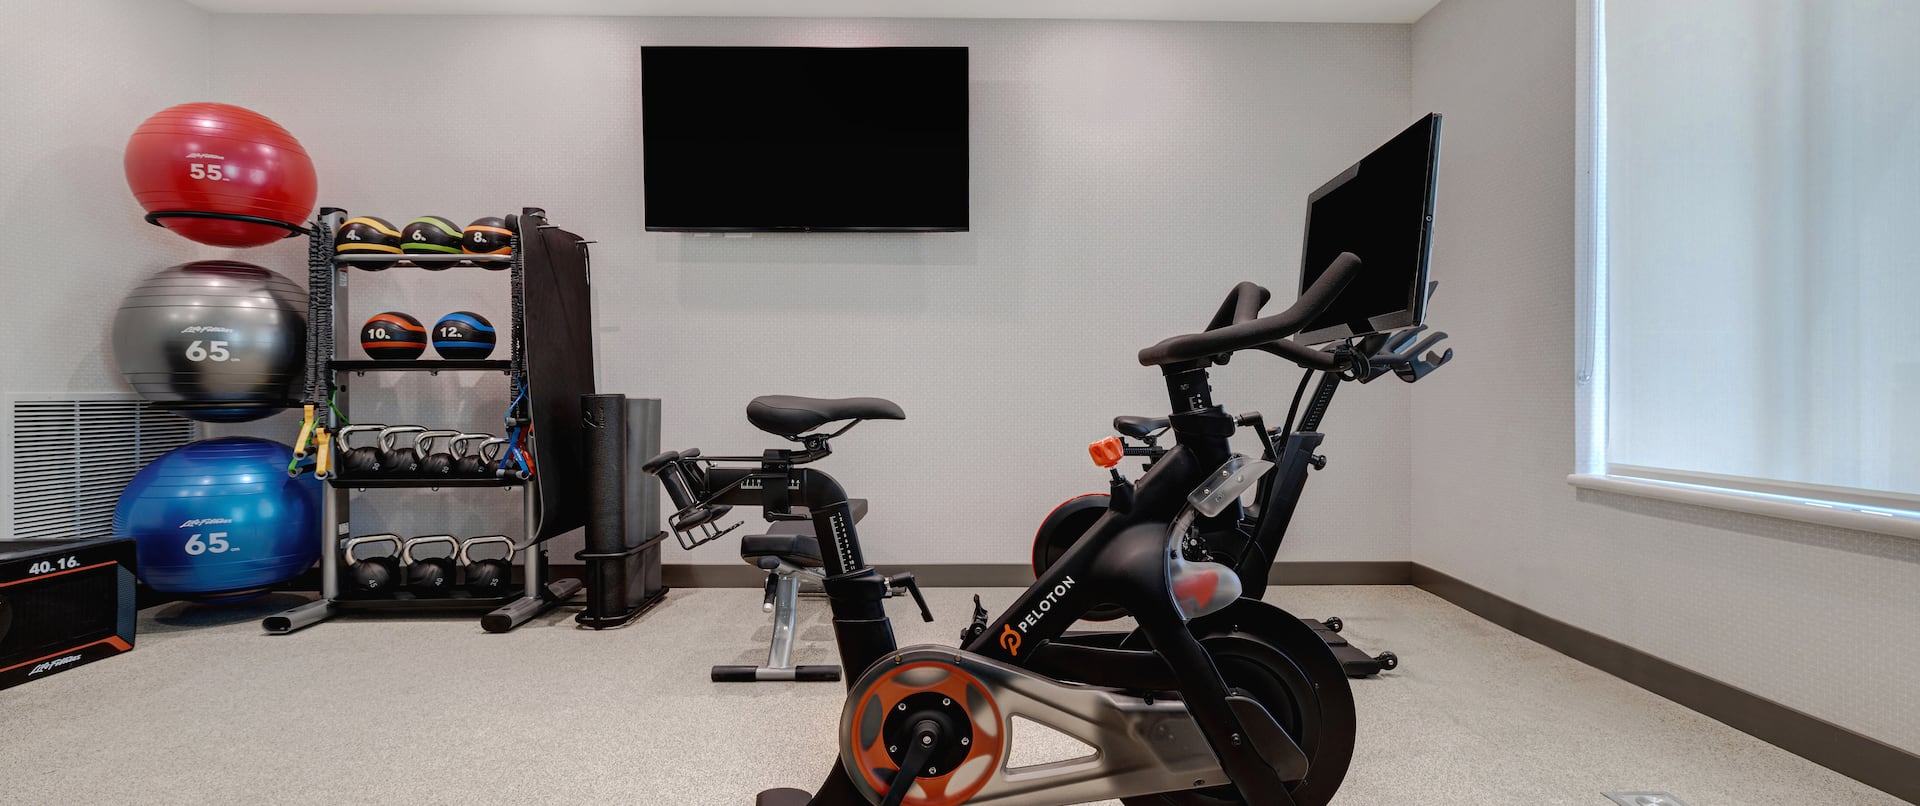 Exercise Balls, Weights, HDTV and Exercise Bike in Fitness Center